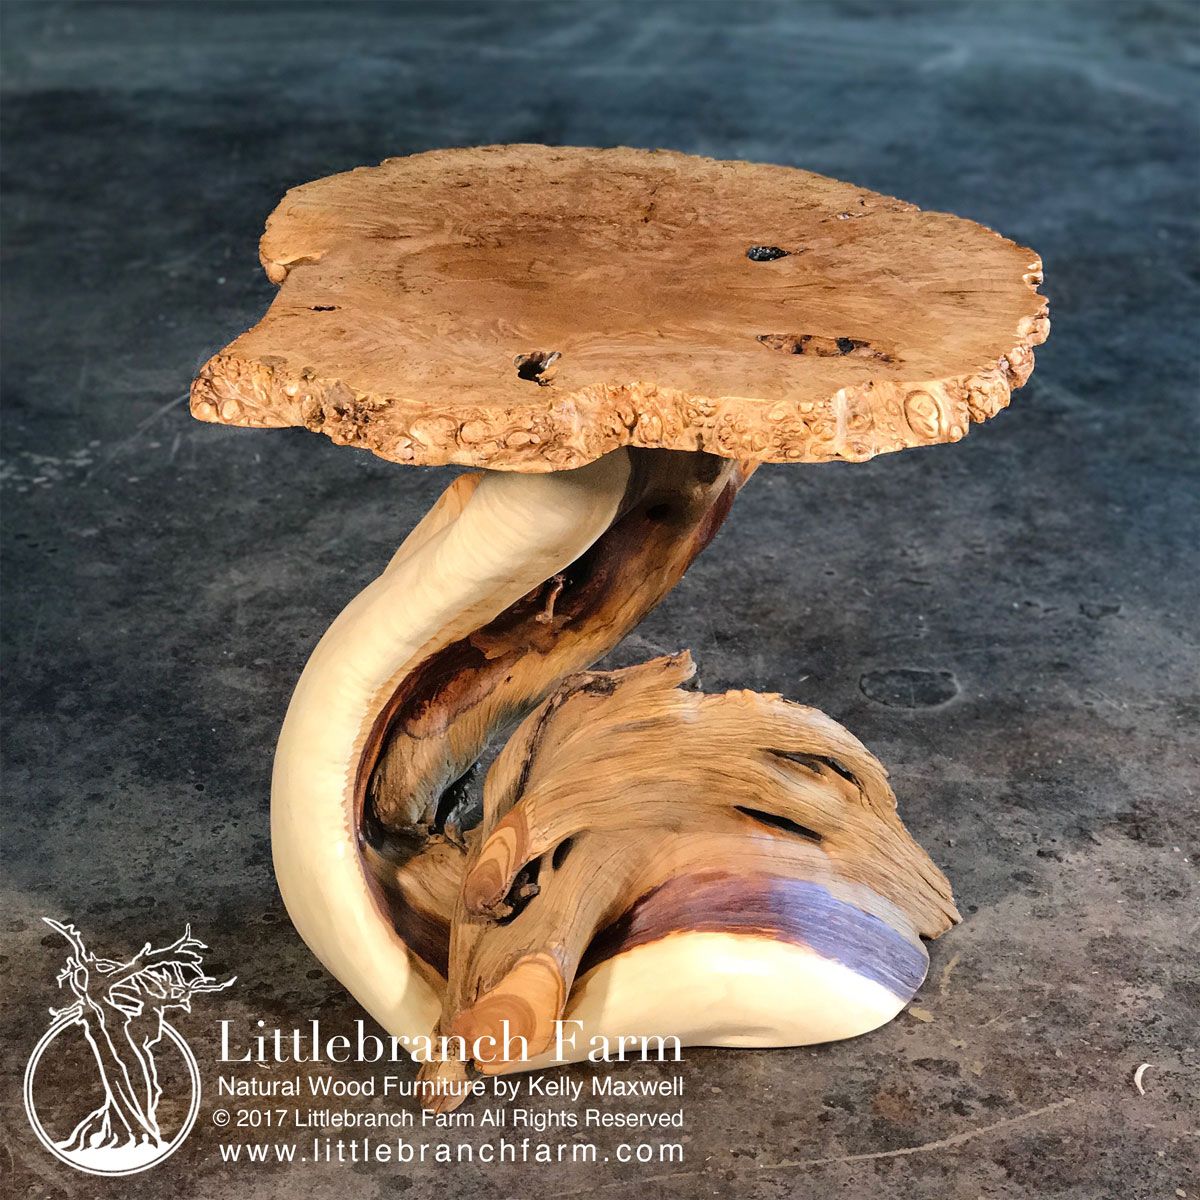 burl wood maple and juniper end table endtable accent woodslab accenttable livingroom rusticfurniture handcrafted rustichomedecor antique round coffee door stopper laptop steel